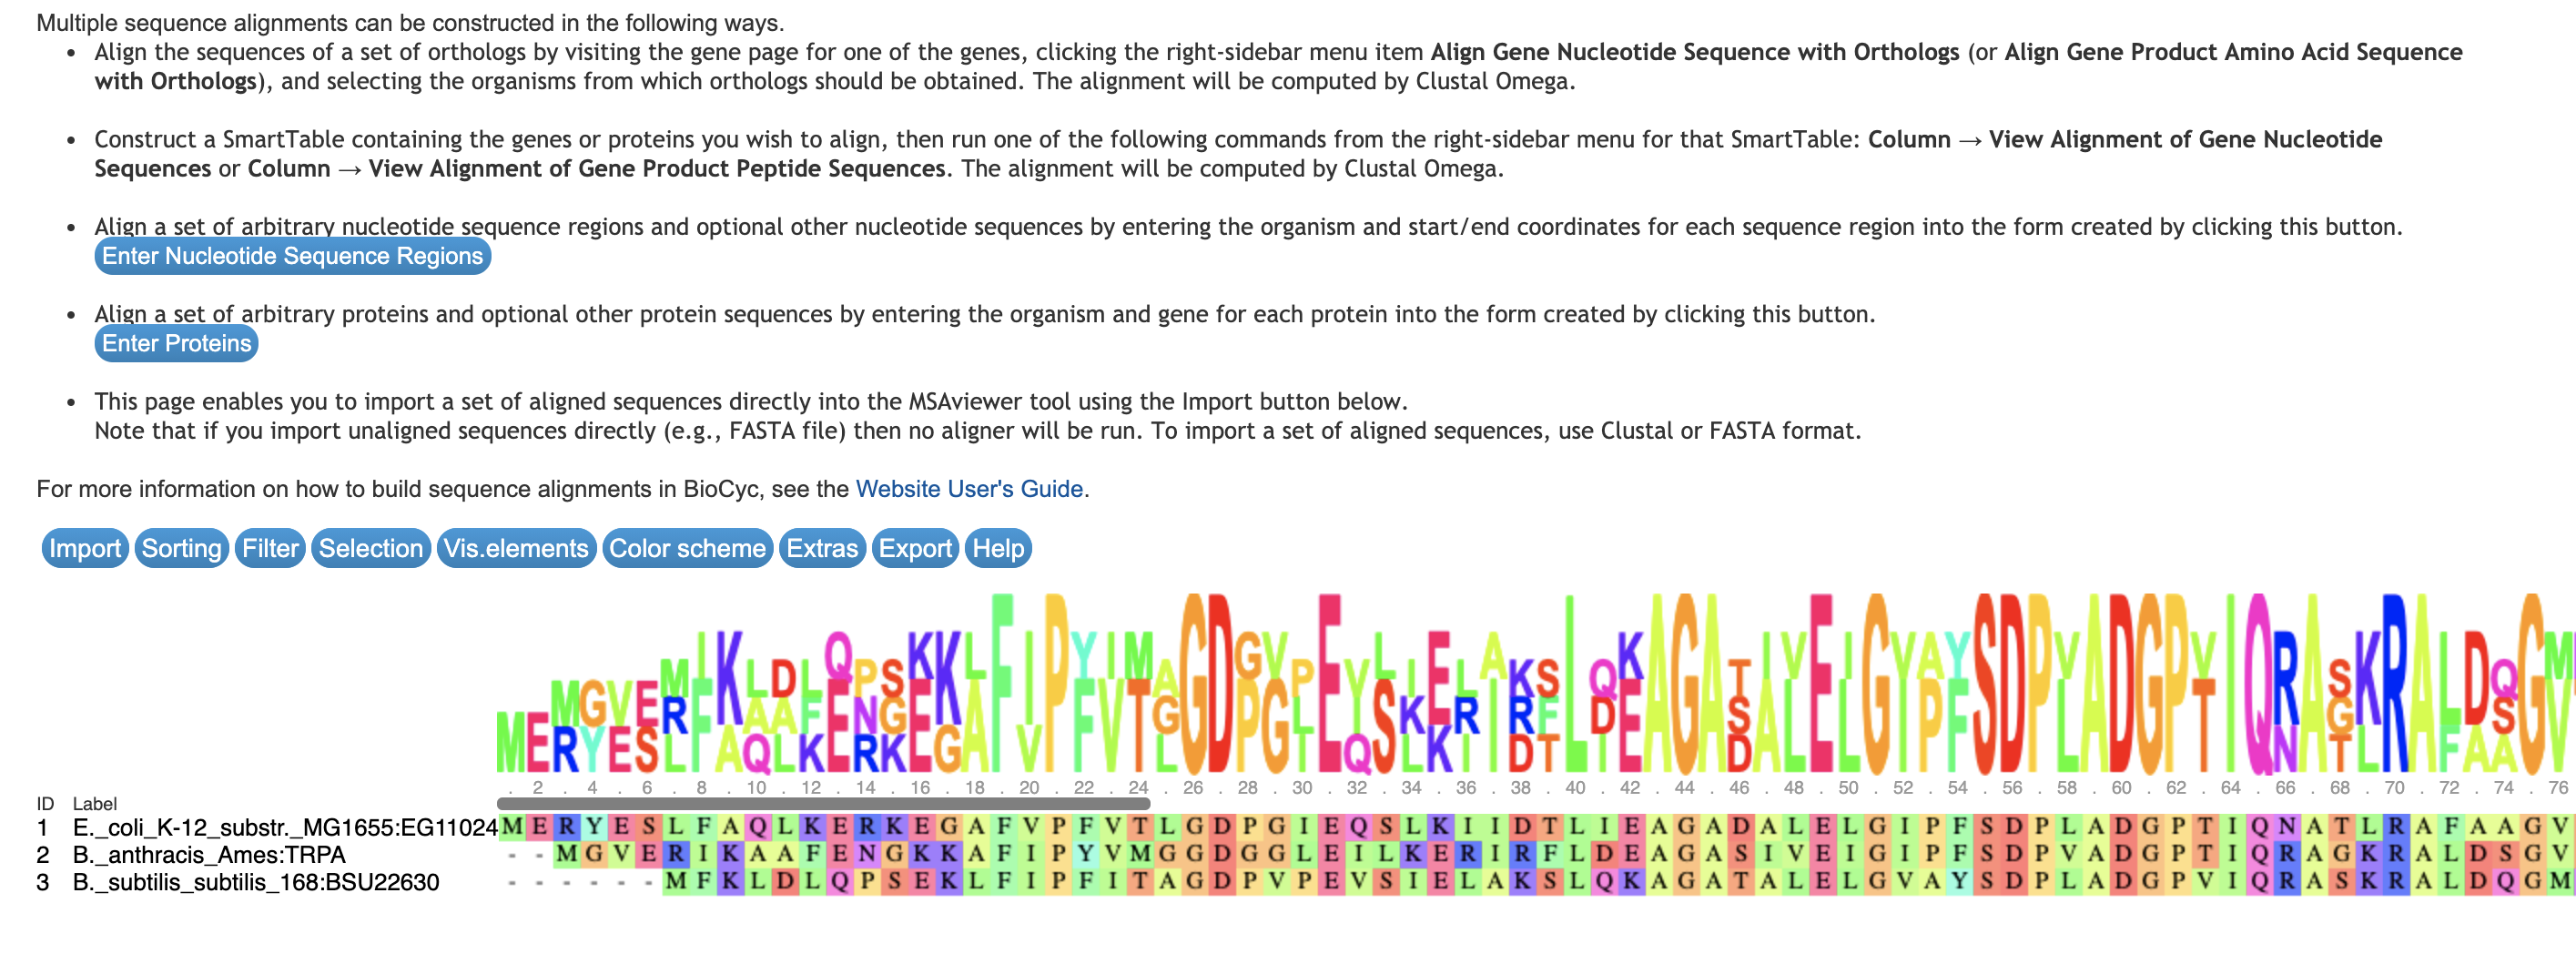 msa-images/MSA-Protein-display.png